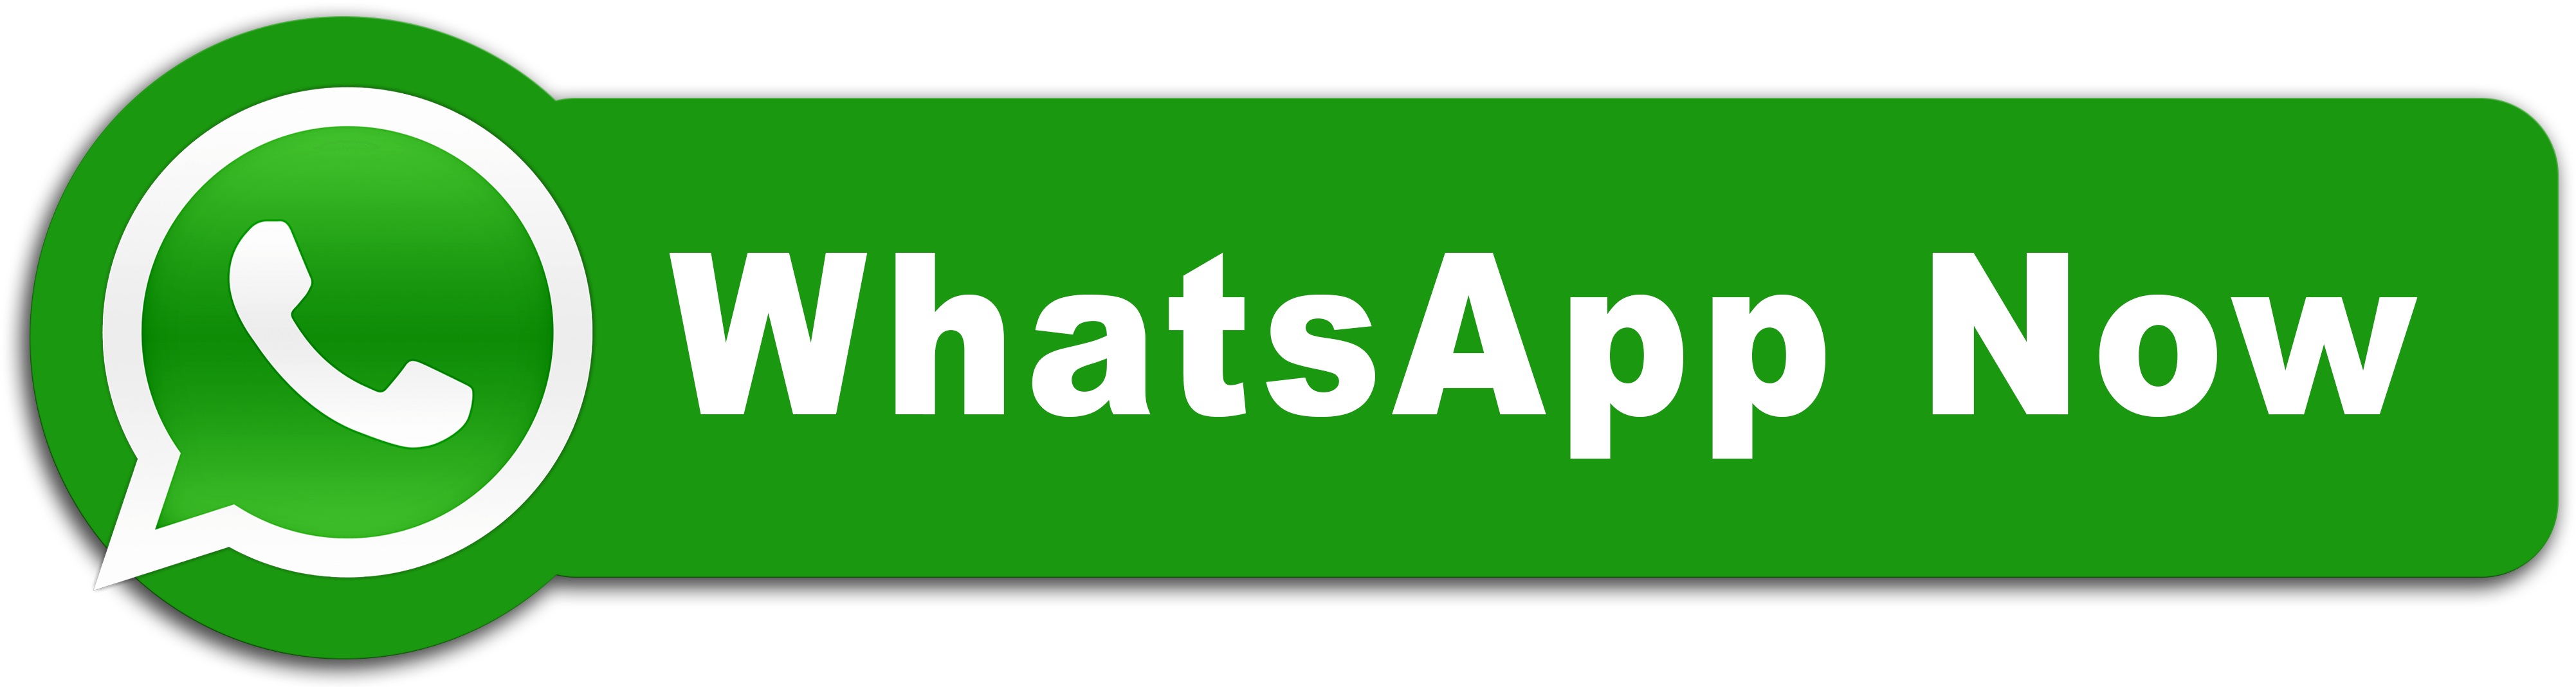 Whats App Now Button PNG